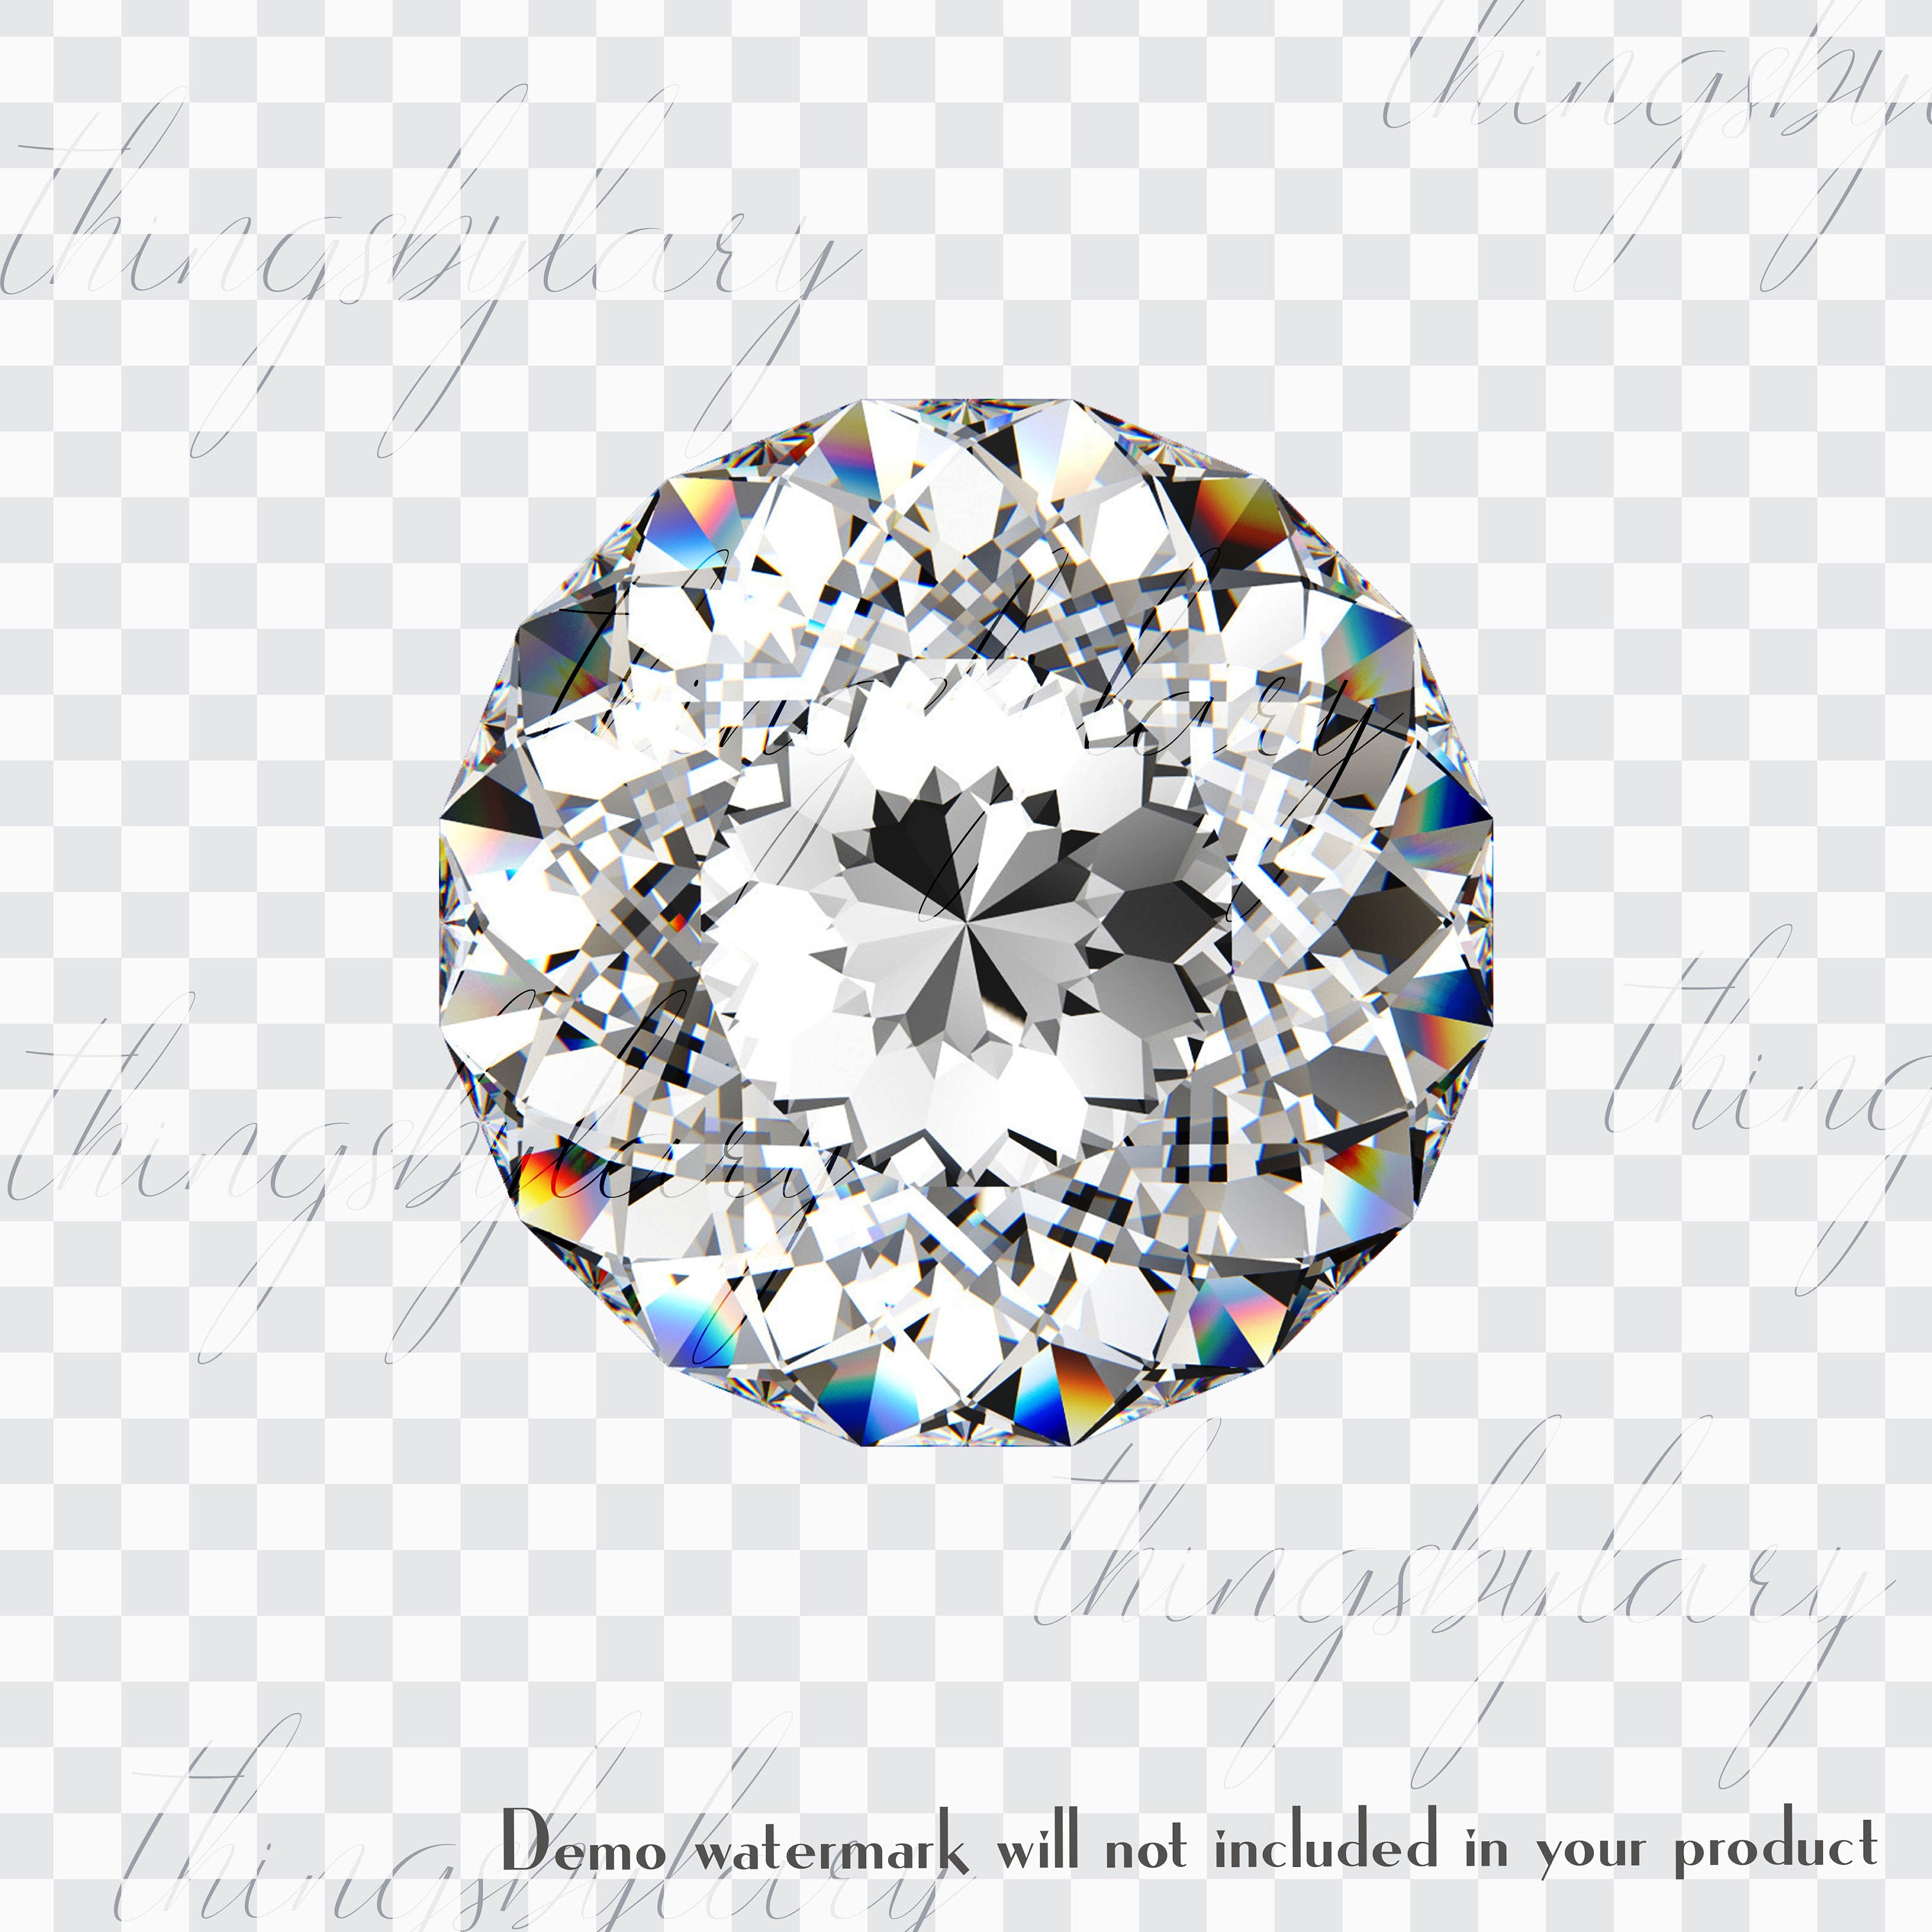 100 Portuguese Diamond PNG Digital Images 300 Dpi Instant Download Commercial Use Bridal Shower Digital Diamond Wedding Real Diamond Graphic